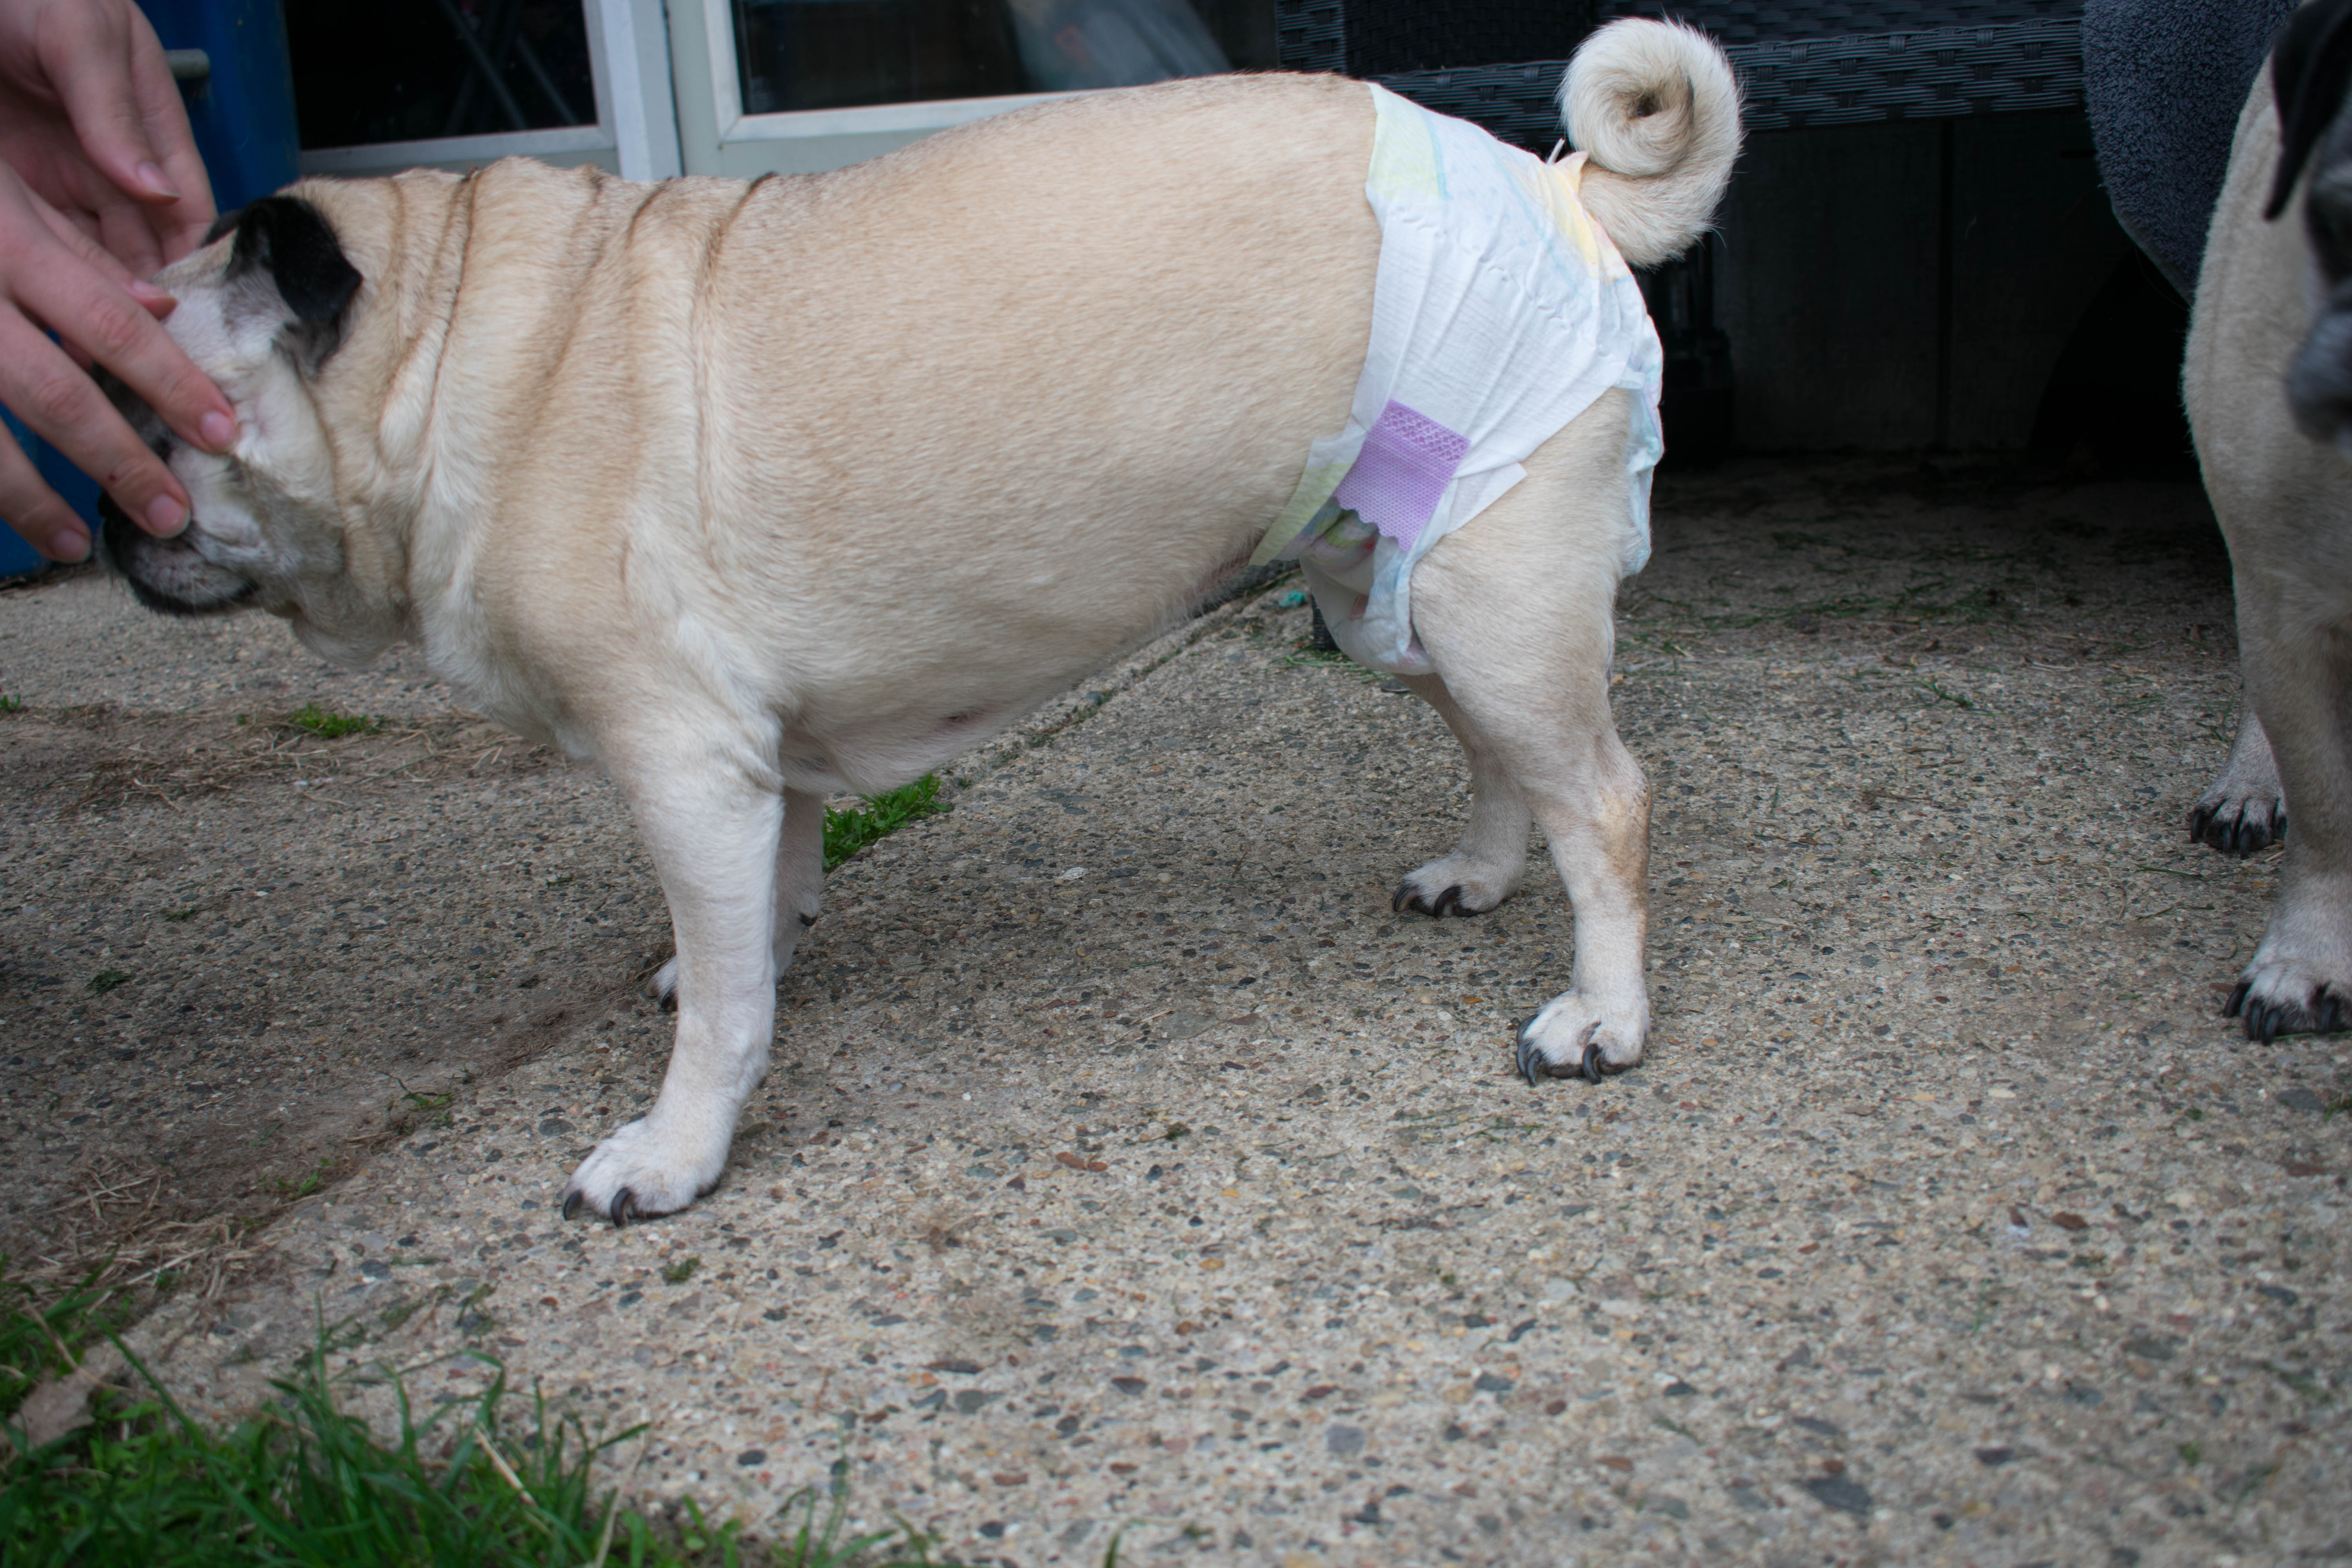 Are Dog Diapers Or Baby Diapers Better For Pugs? Frank